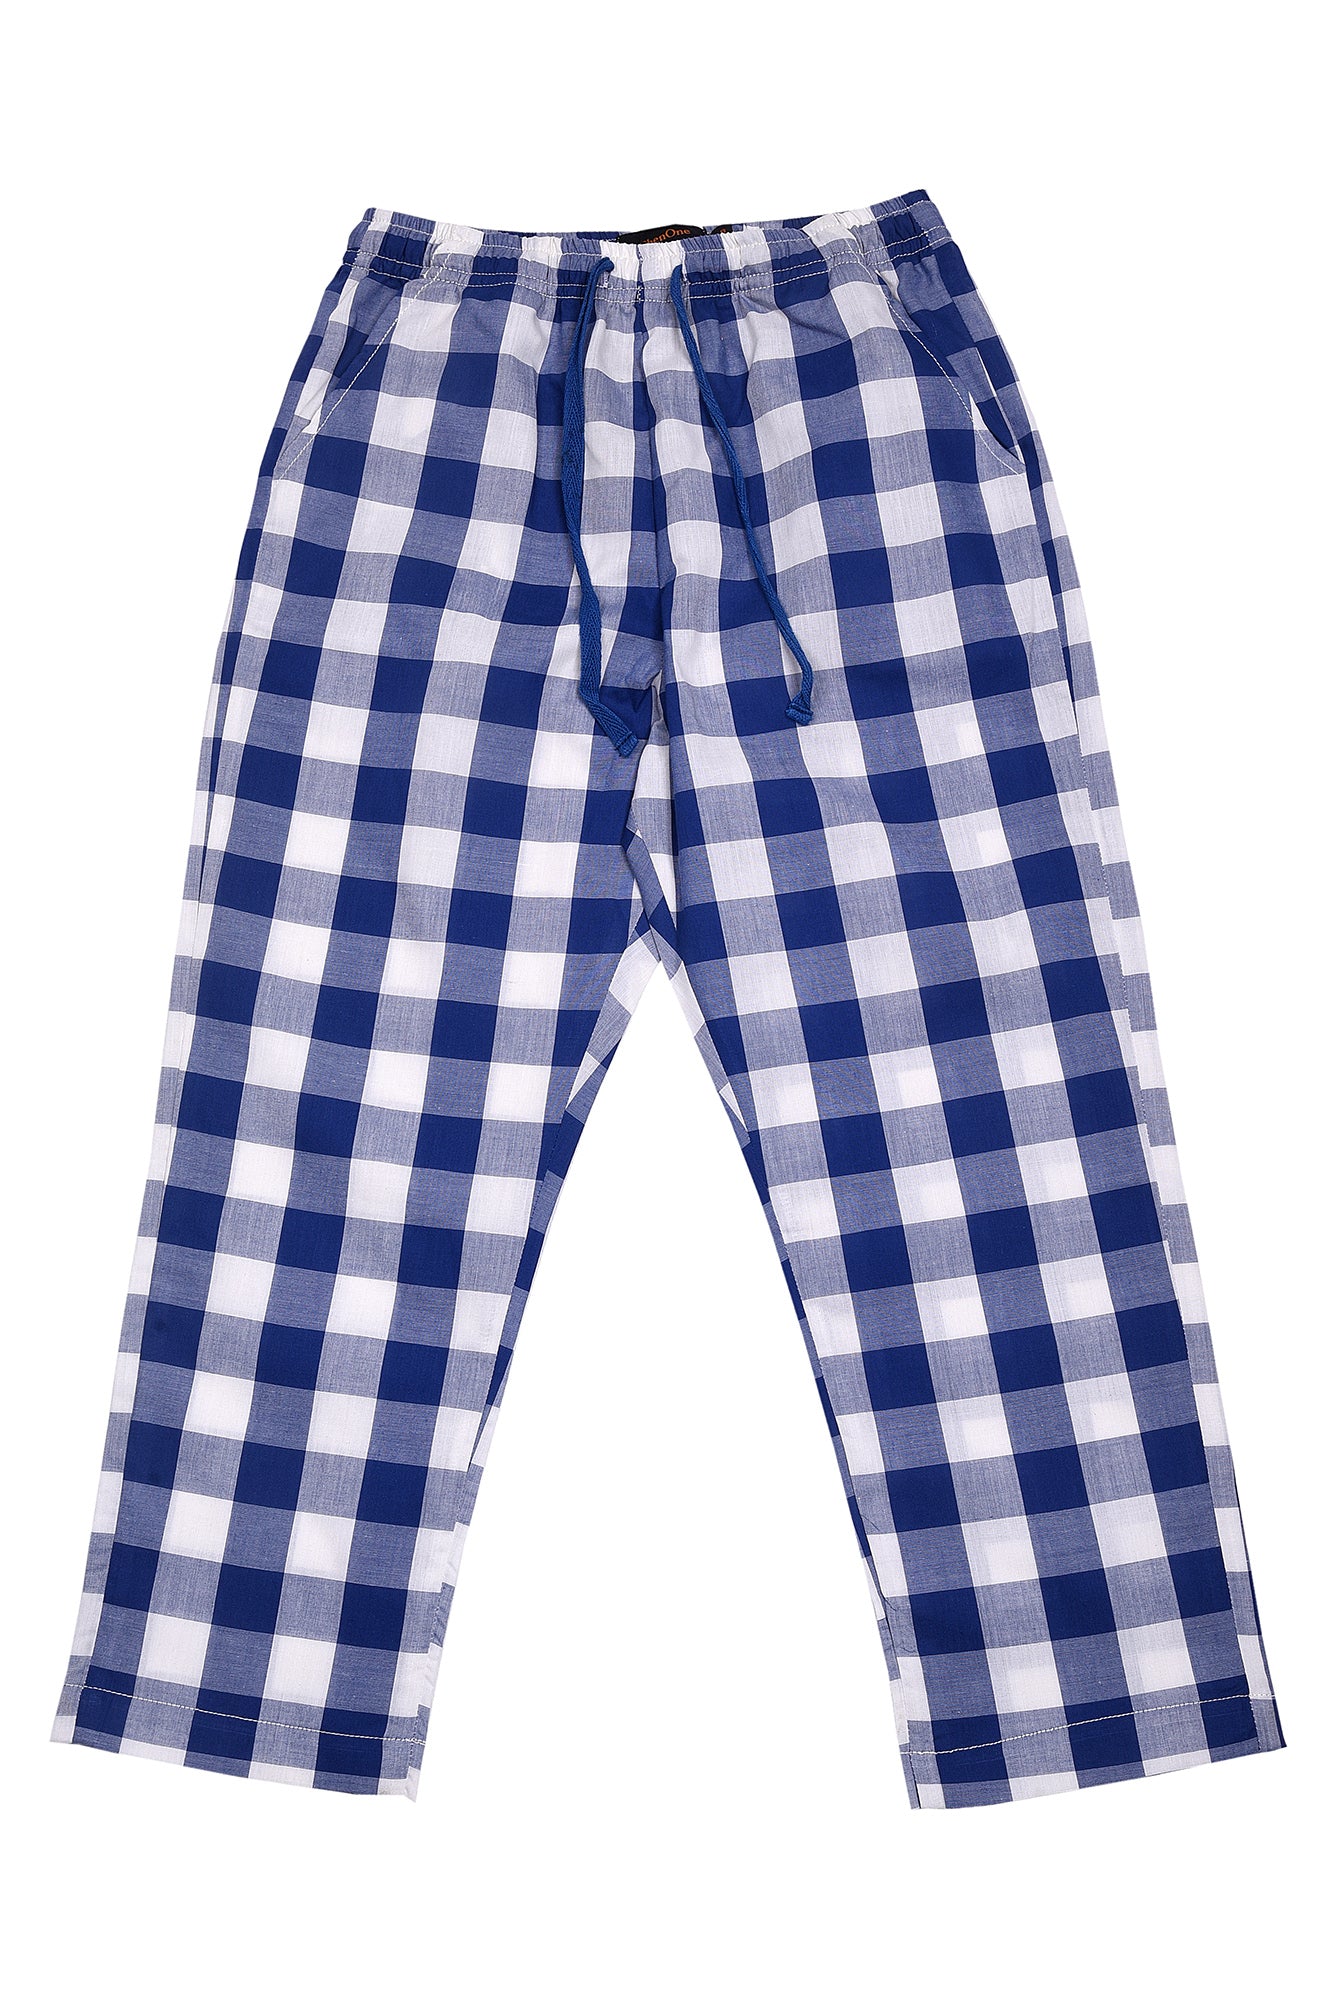 KDS-B-13161 PULL ON TROUSER BLUE CHECK